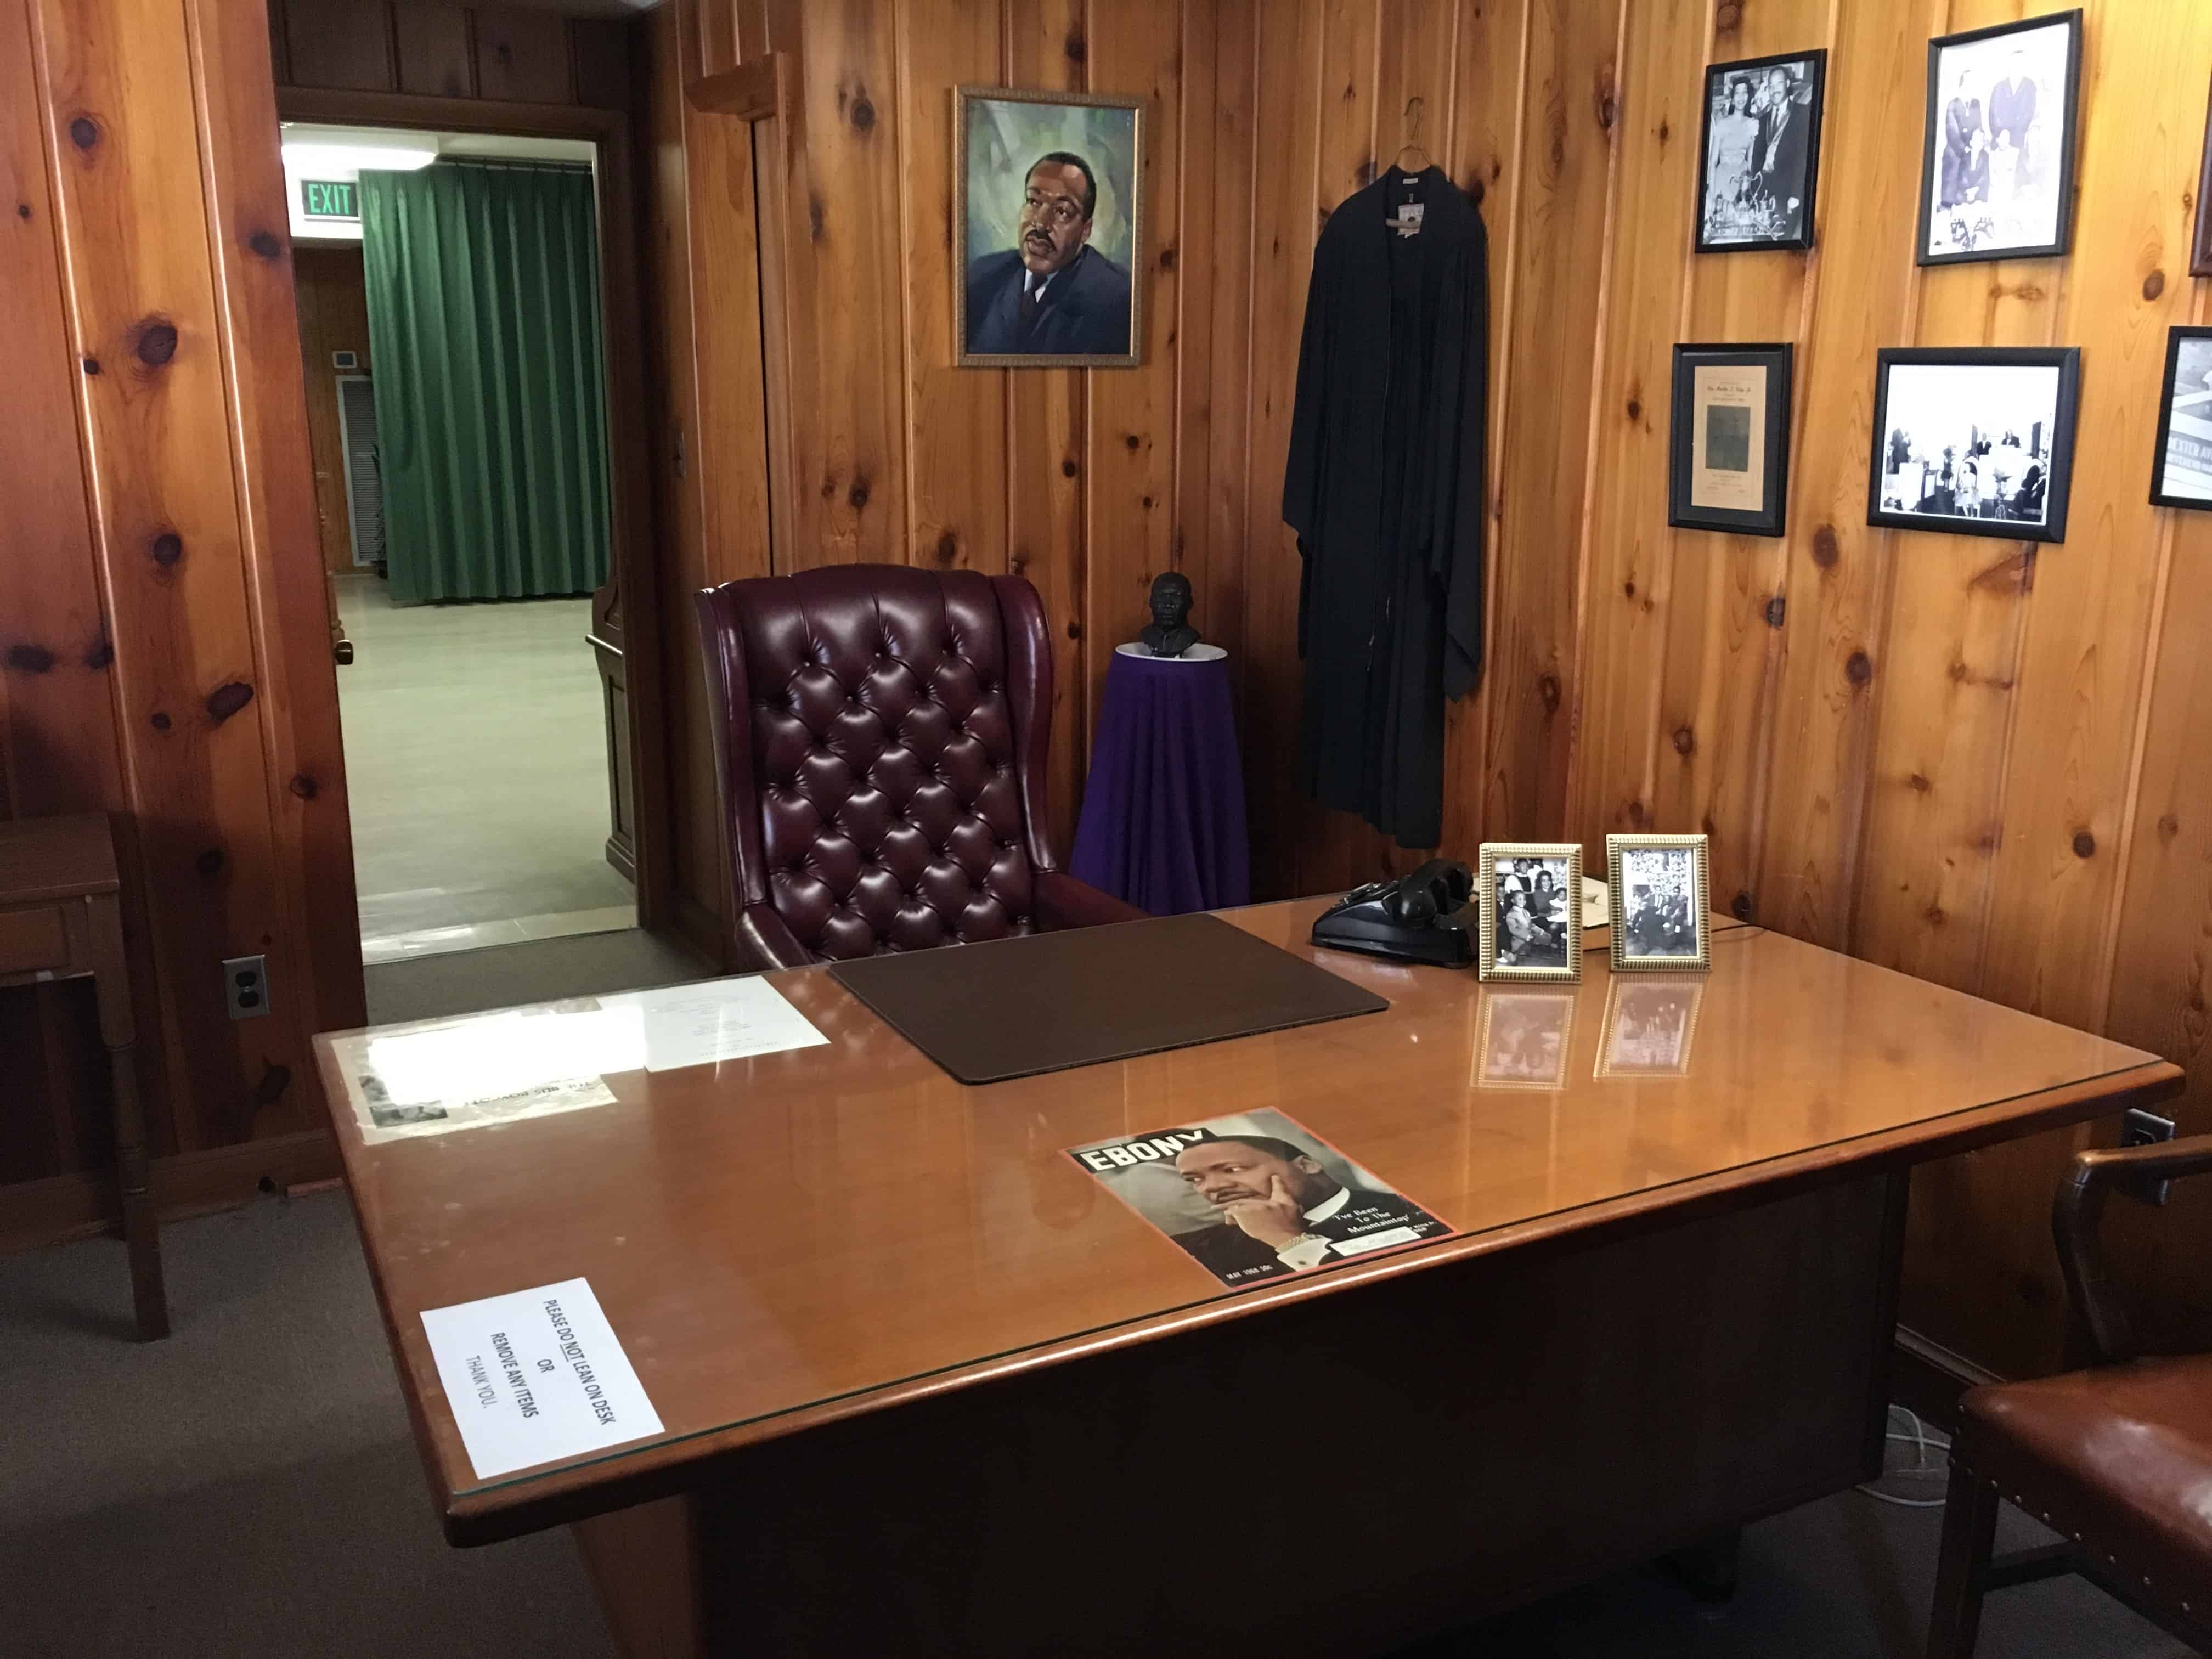 Dr. King's office at Dexter Avenue King Memorial Baptist Church in Montgomery, Alabama